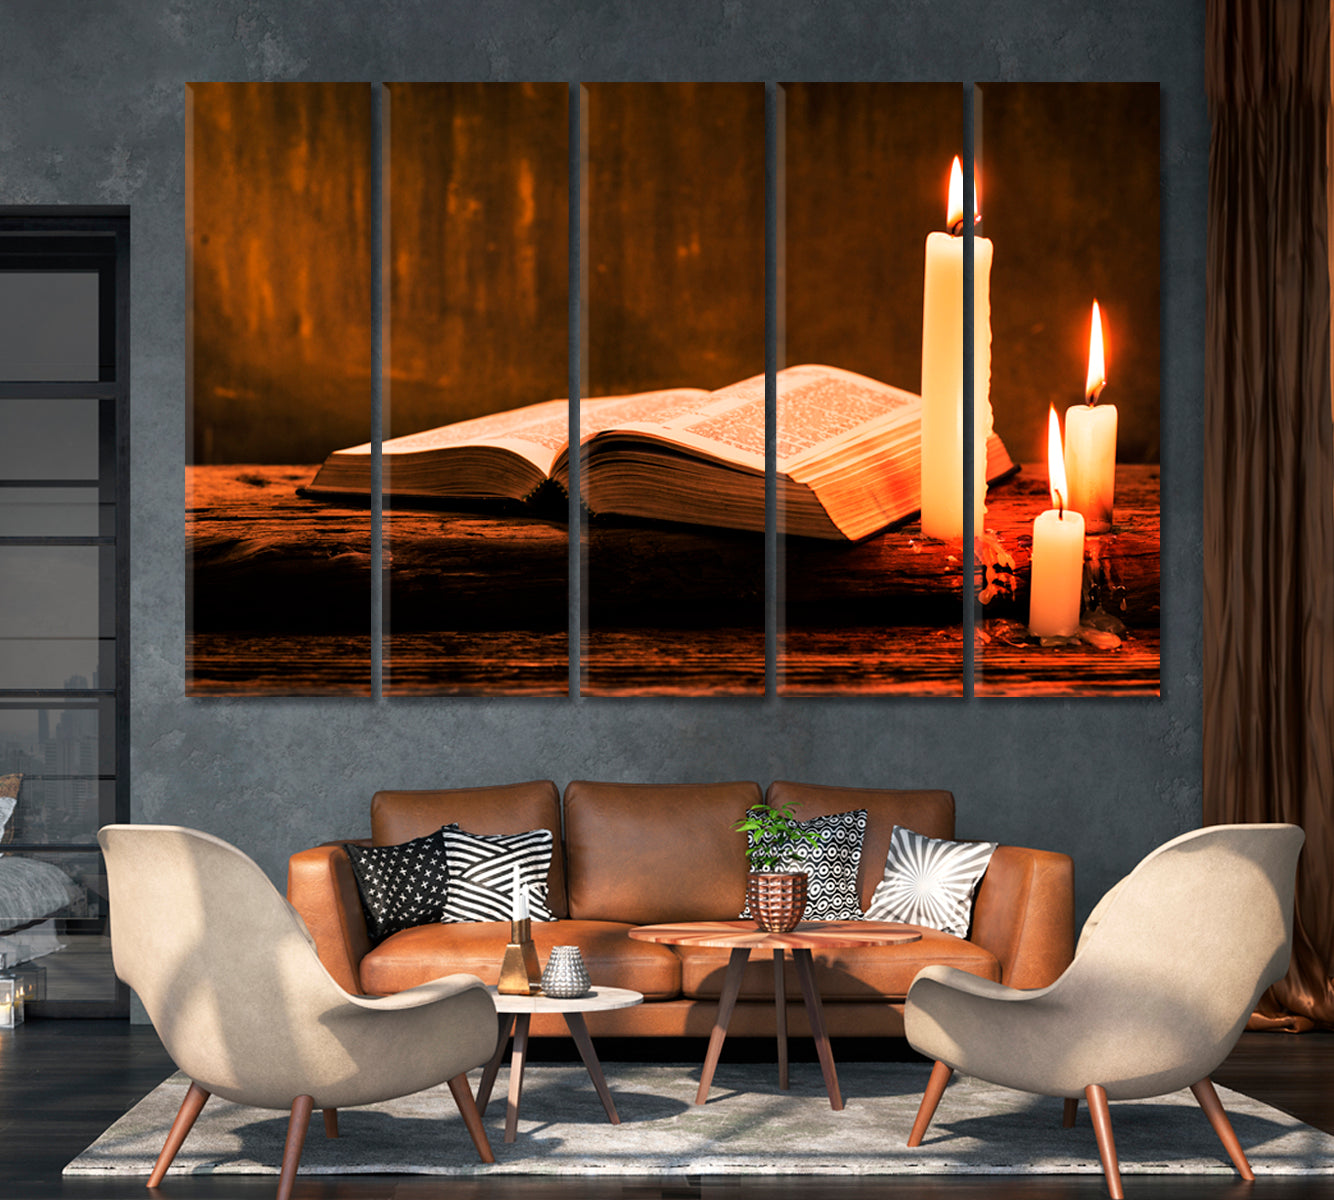 Bible with Candles Canvas Print-CetArt-1 Panel-24x16 inches-CetArt